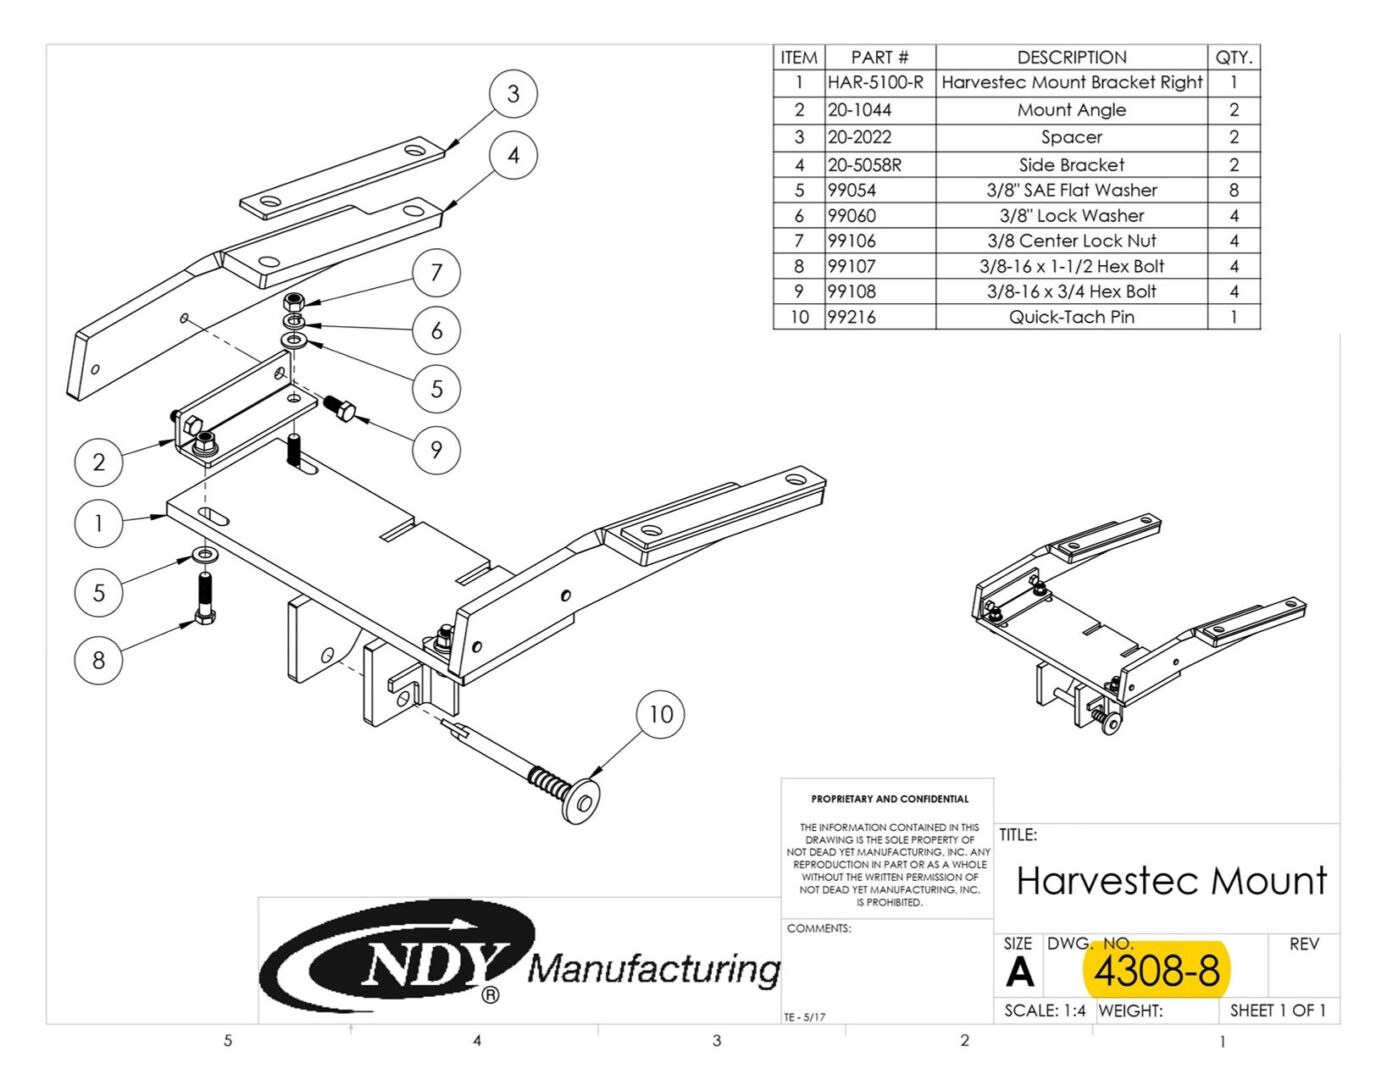 A diagram showing the parts of a Stalk Stomper Mount Assembly for Row 8 on Harvestec 4308 Series Corn Head.